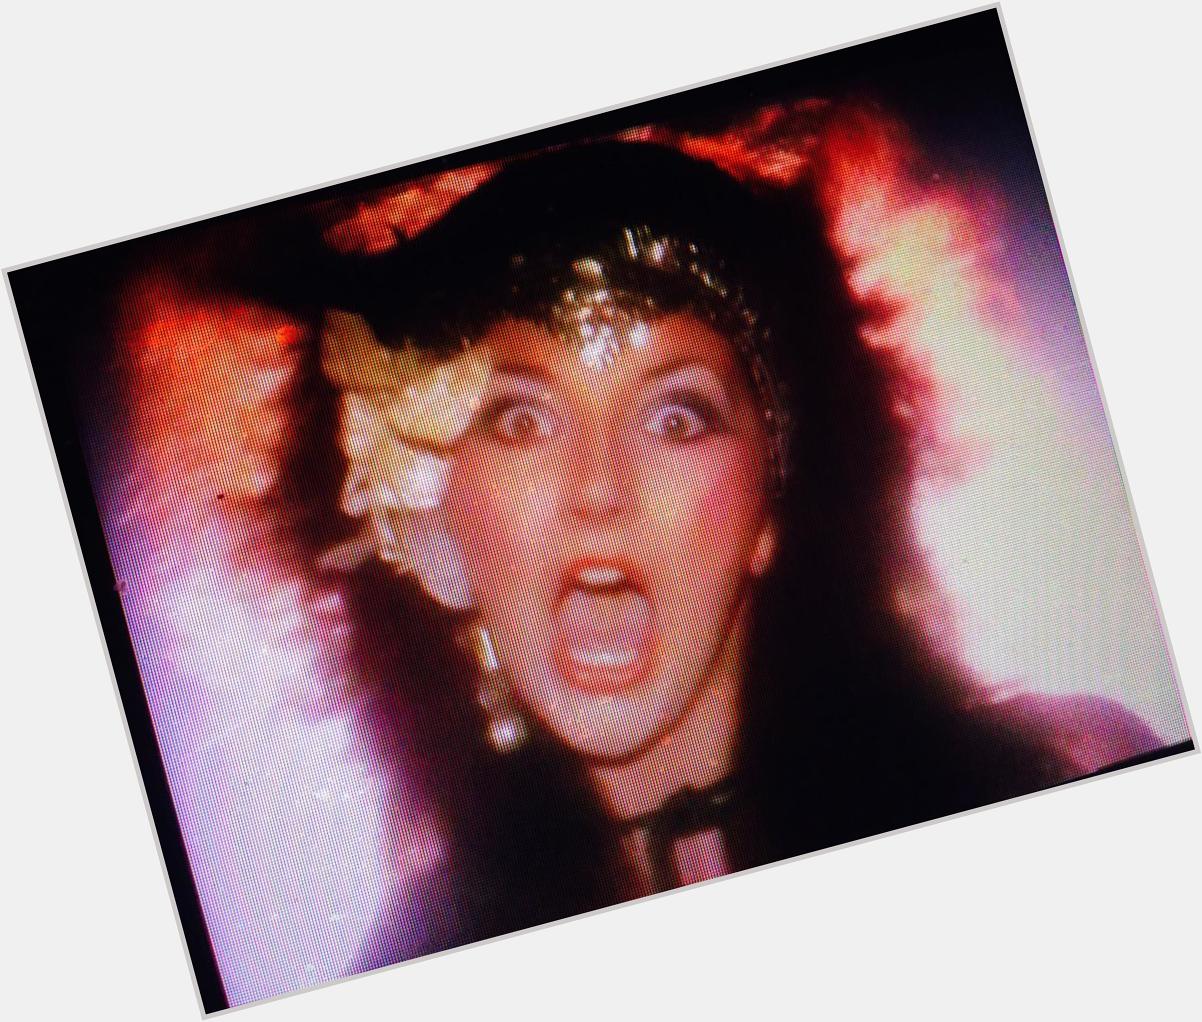 Kate Bush reenacting the cosmic birth-cries of the universe in labor. Happy birthday   